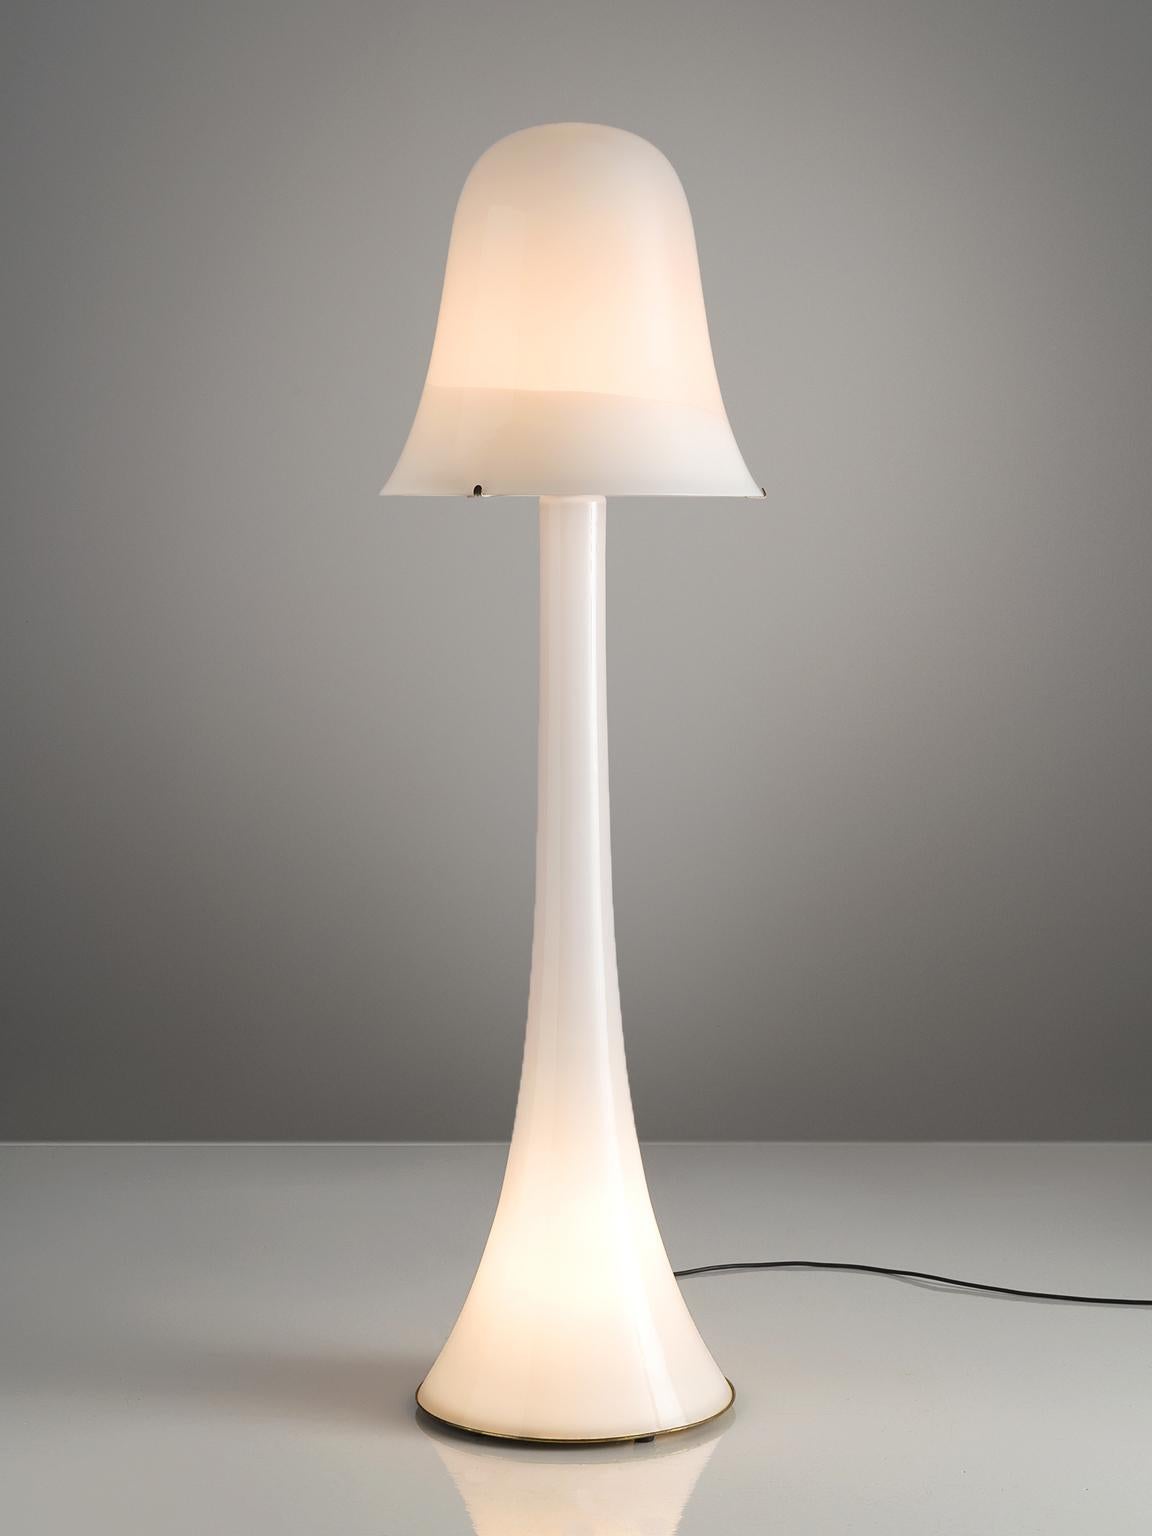 Floor lamp, white opaline glass, Italy, 1970s.

This frivolous lamp is designed in the shape of a mushroom. The foot and shade are both executed in white opaline glass. The aesthetics of this lamp bear the typical traits of postwar Italian design.